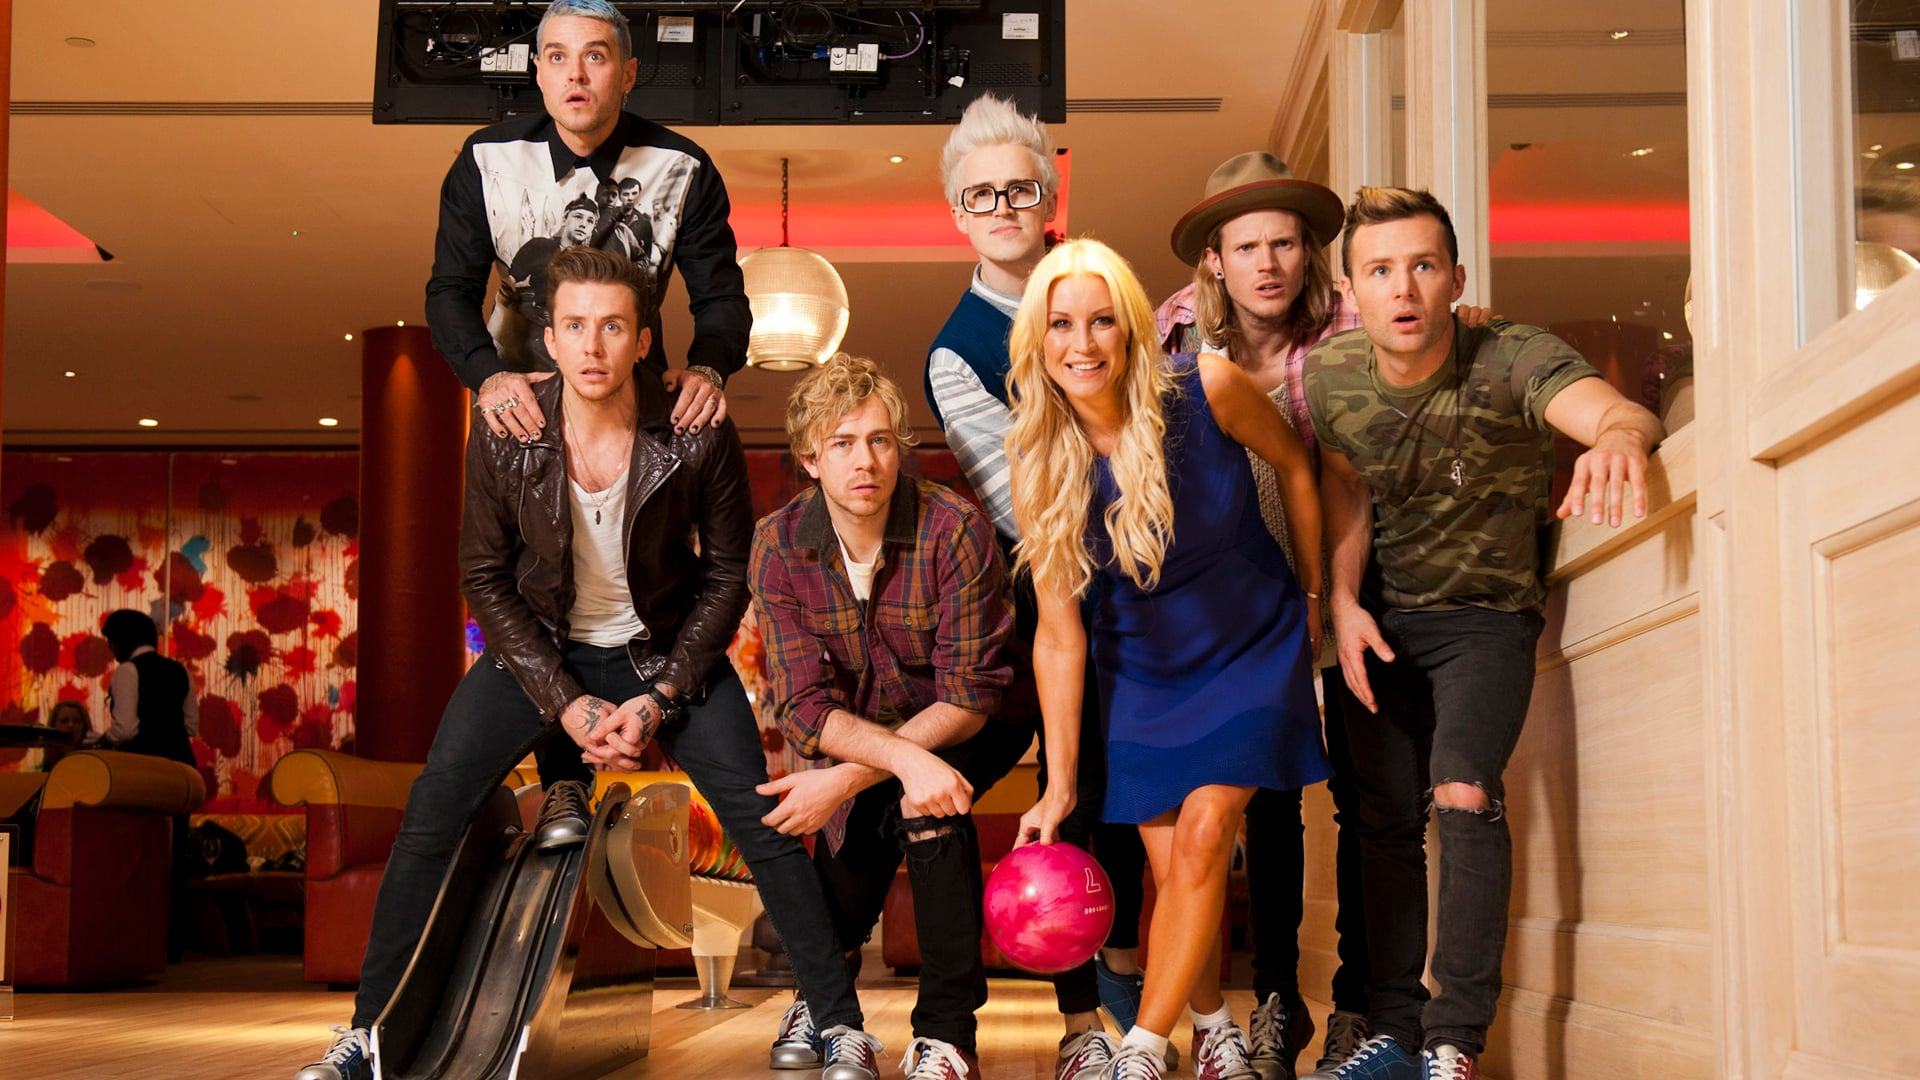 McBusted and Denise Van Outen (Videographer & Editor)